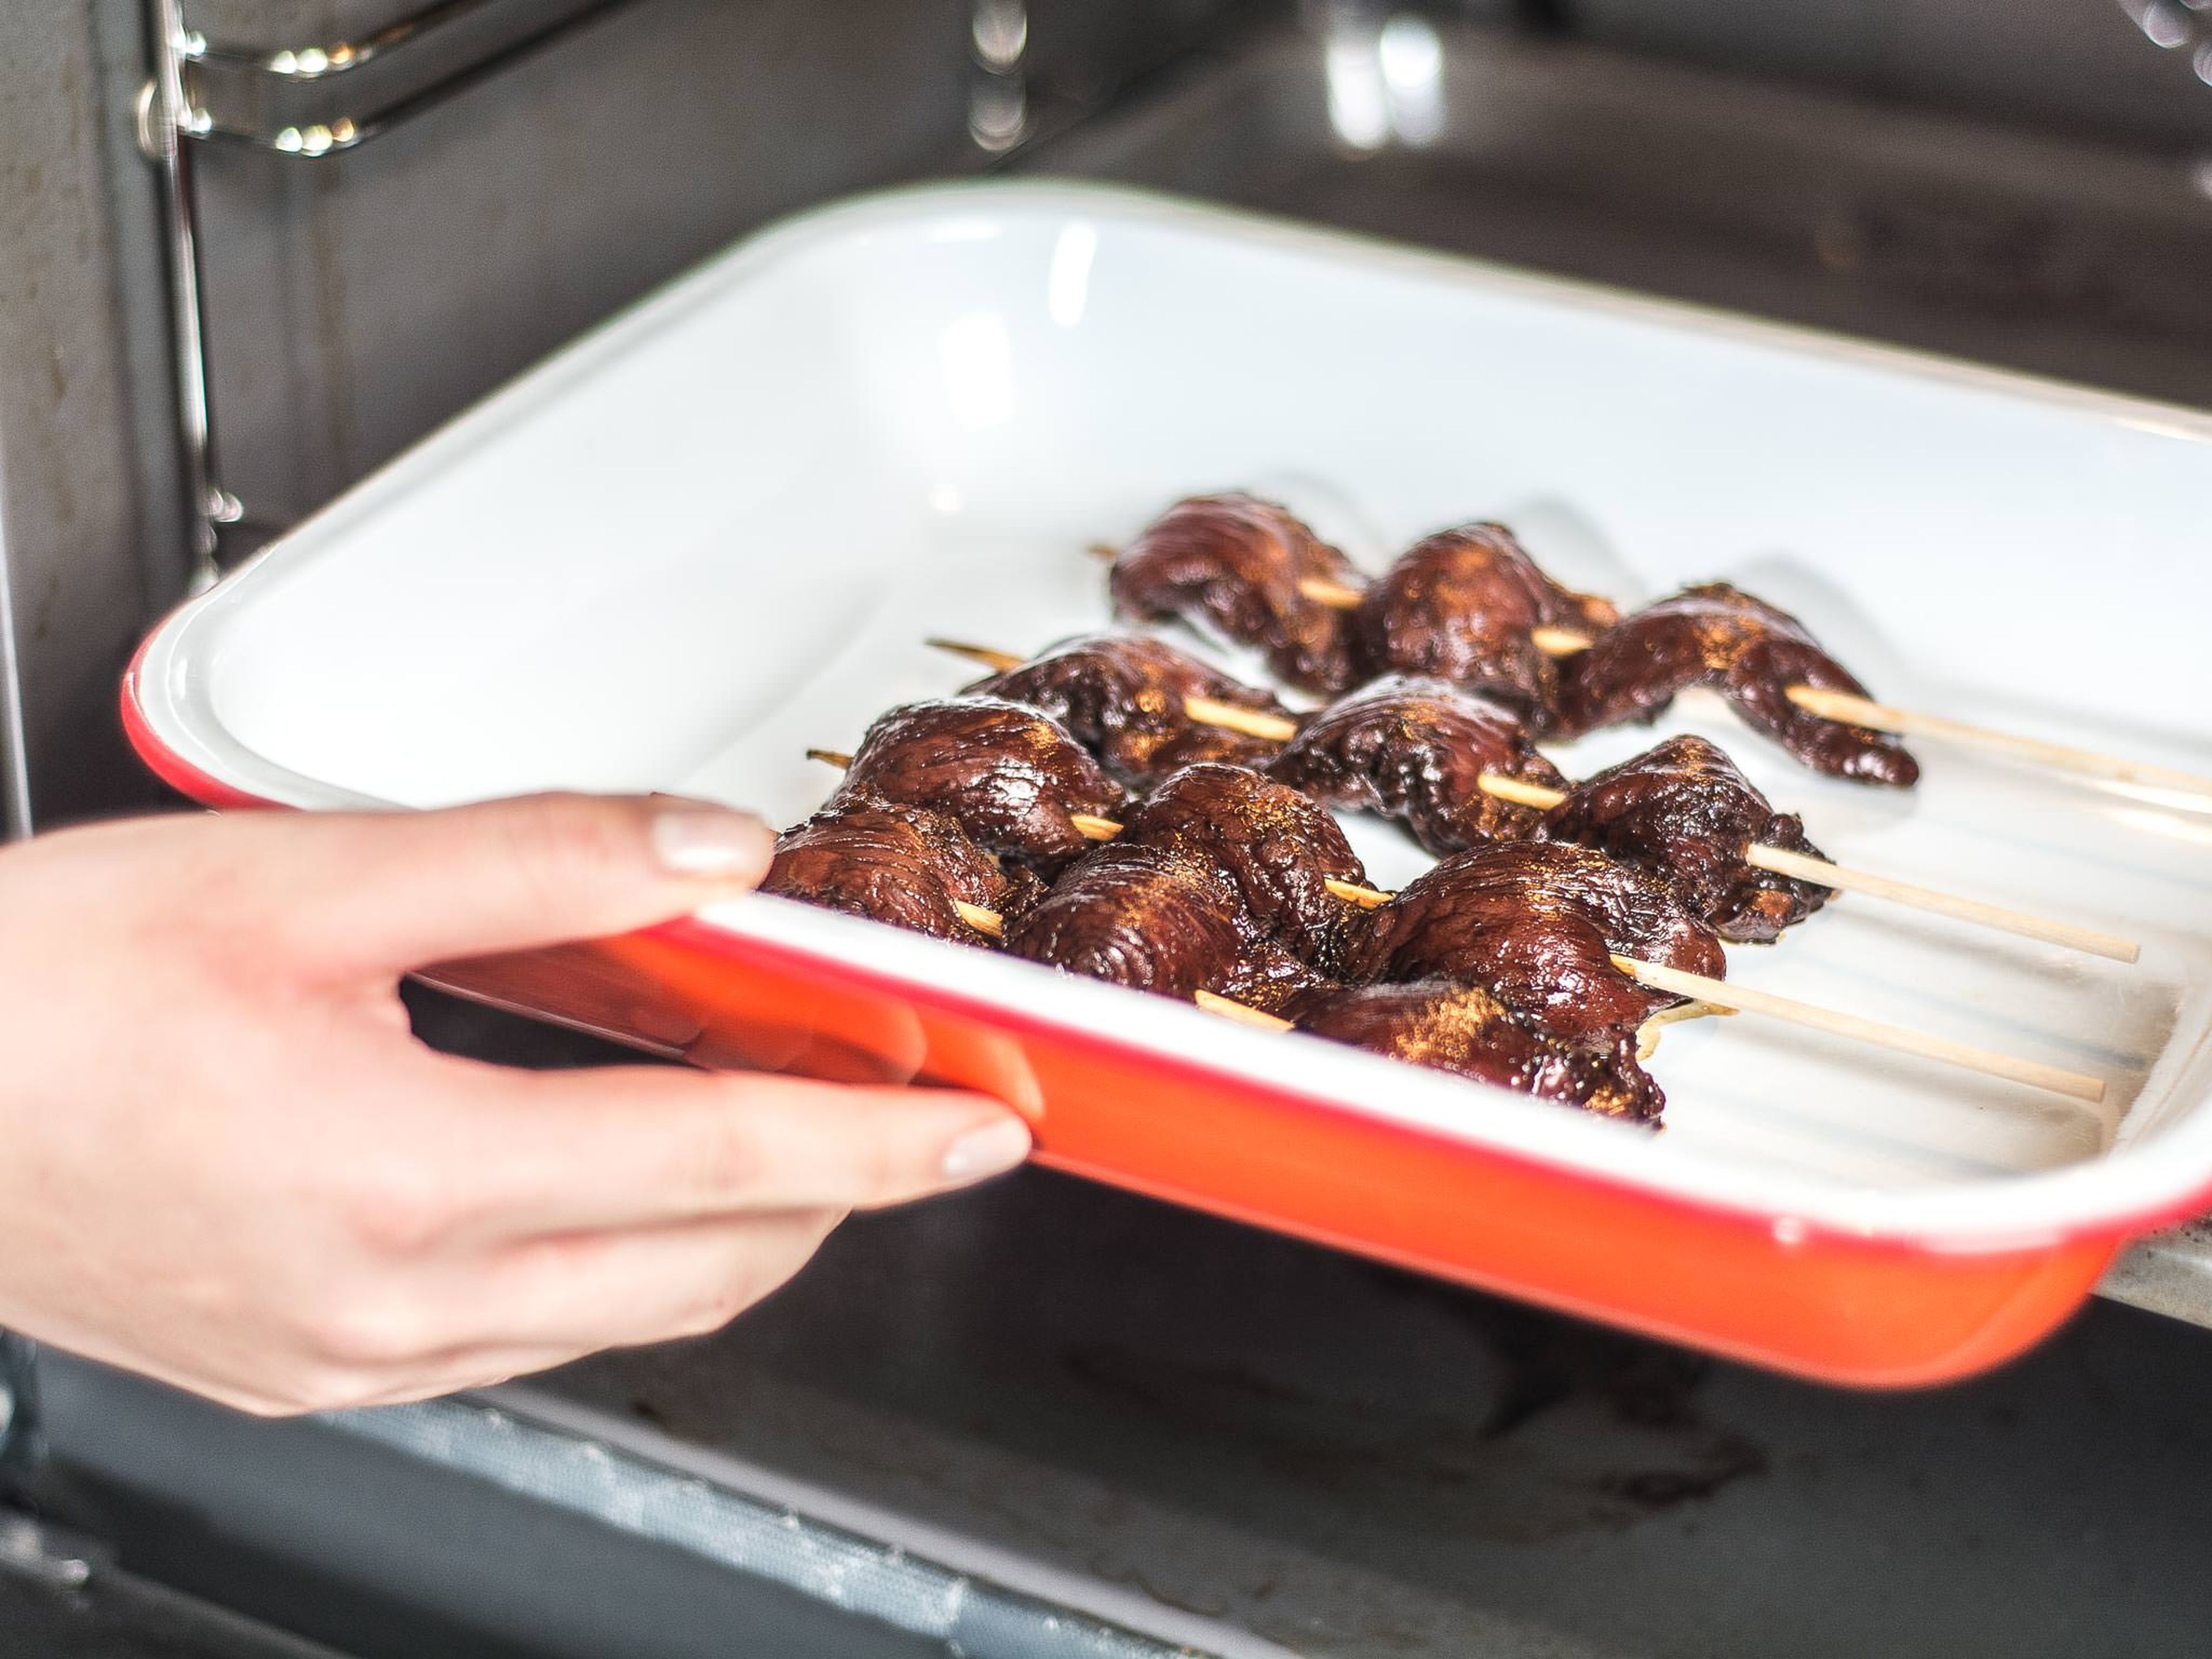 Spear the lamb strips onto wooden skewers and cook in preheated oven at 180°C/ 355°F for approx. 10 – 12 min.